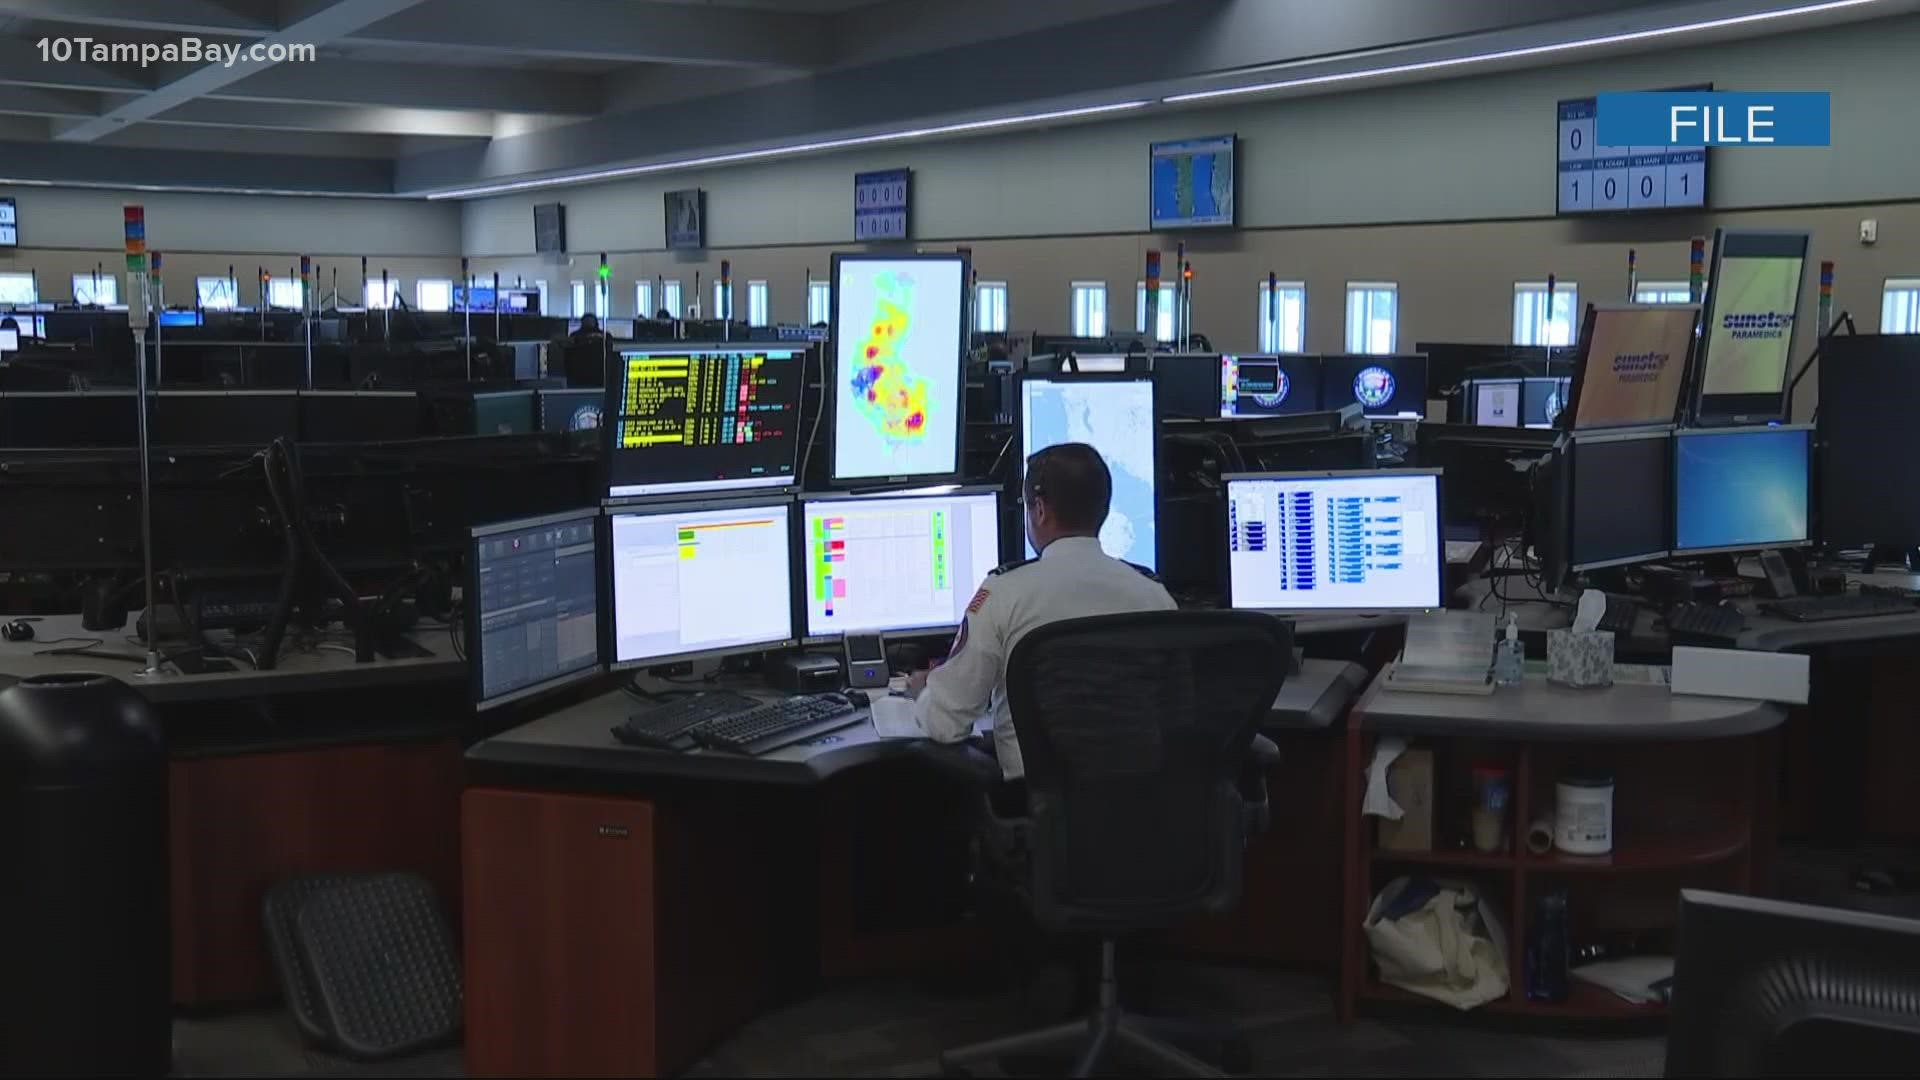 Across the country, 911 Call Centers are dealing with short staffing. Pinellas County is no exception.